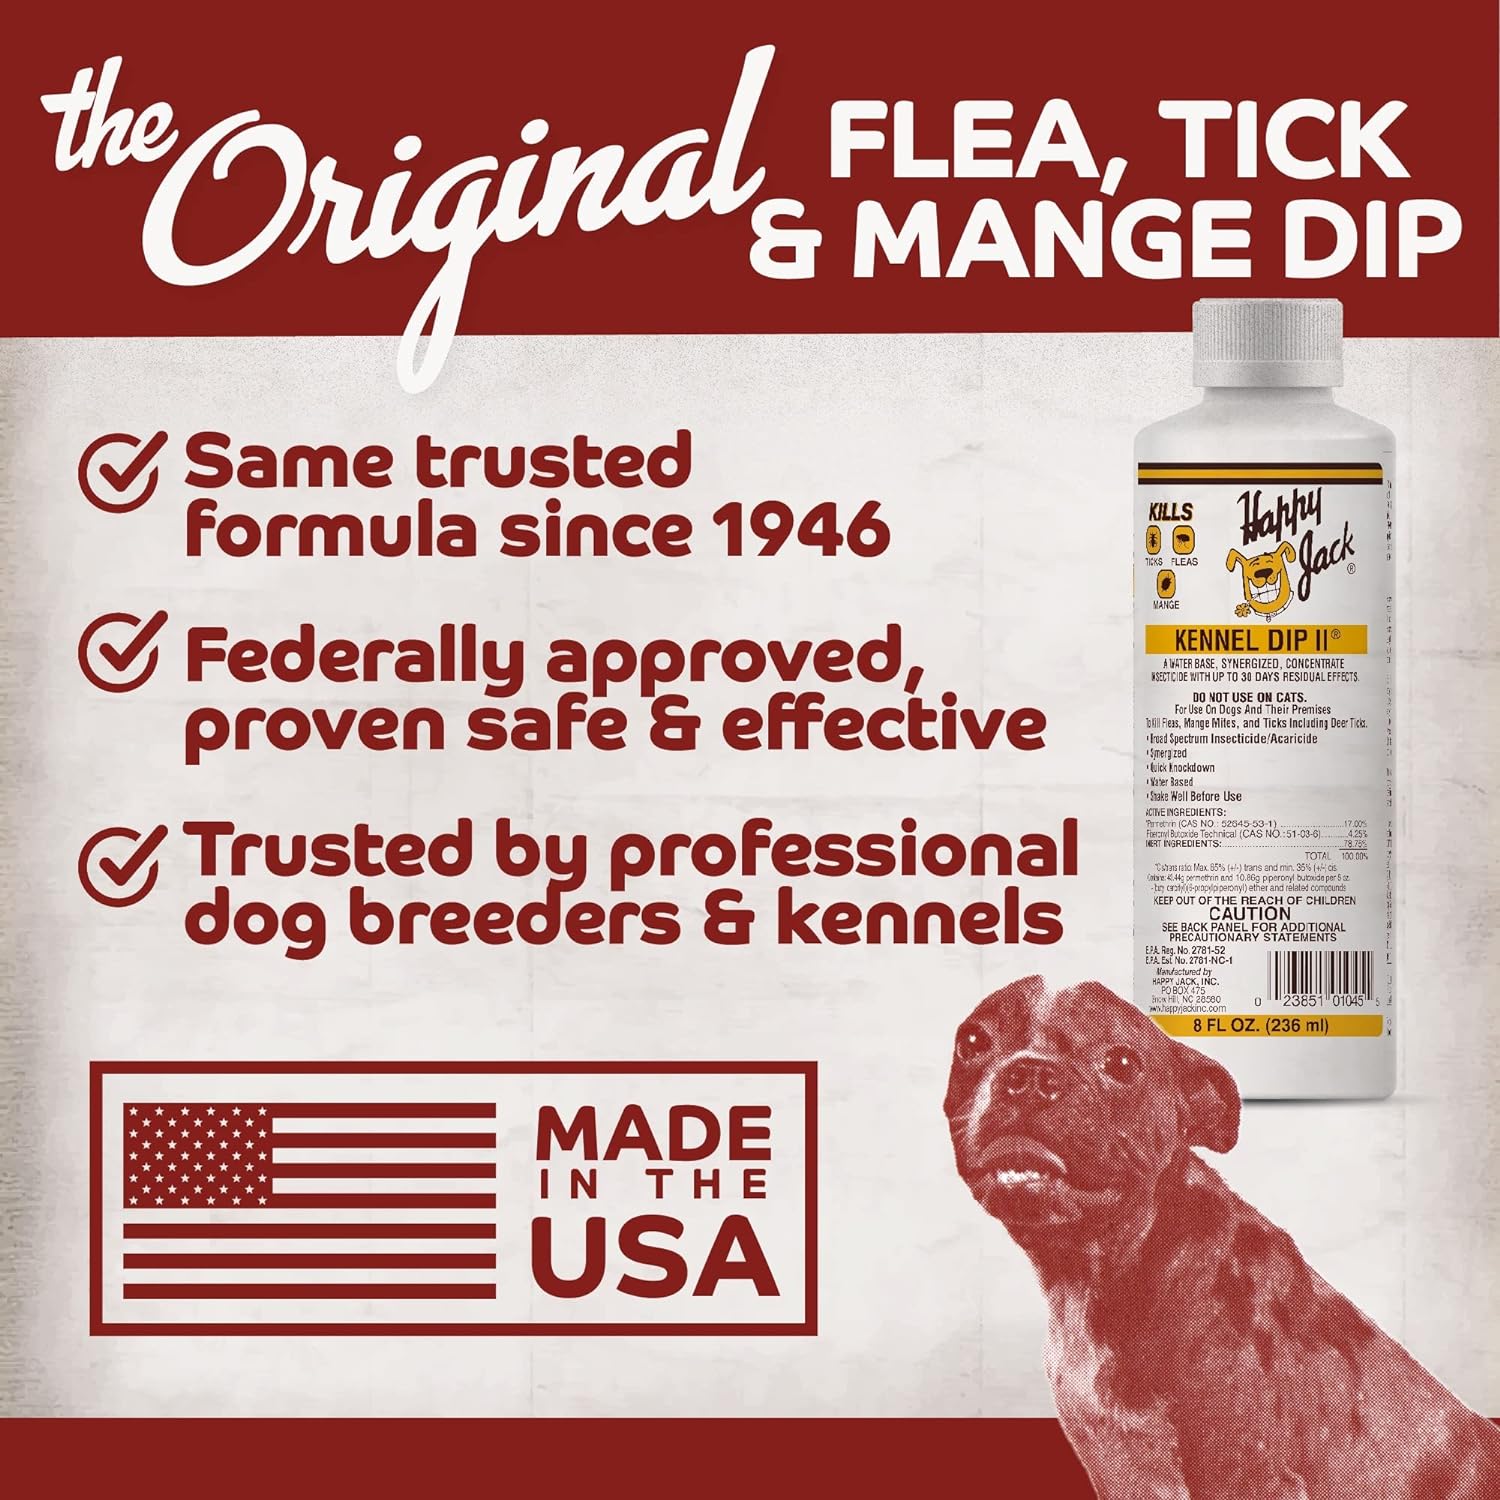 Happy Jack Kennel Dip Dog Flea and Tick Treatment & Prevention, Made in USA, Spray Yard & Home 30-Day Control, Kills Fleas, Ticks, Deer Ticks, Mange, Lice, for Puppies, Small to Large Dogs (8 oz) : Pet Kennels : Pet Supplies